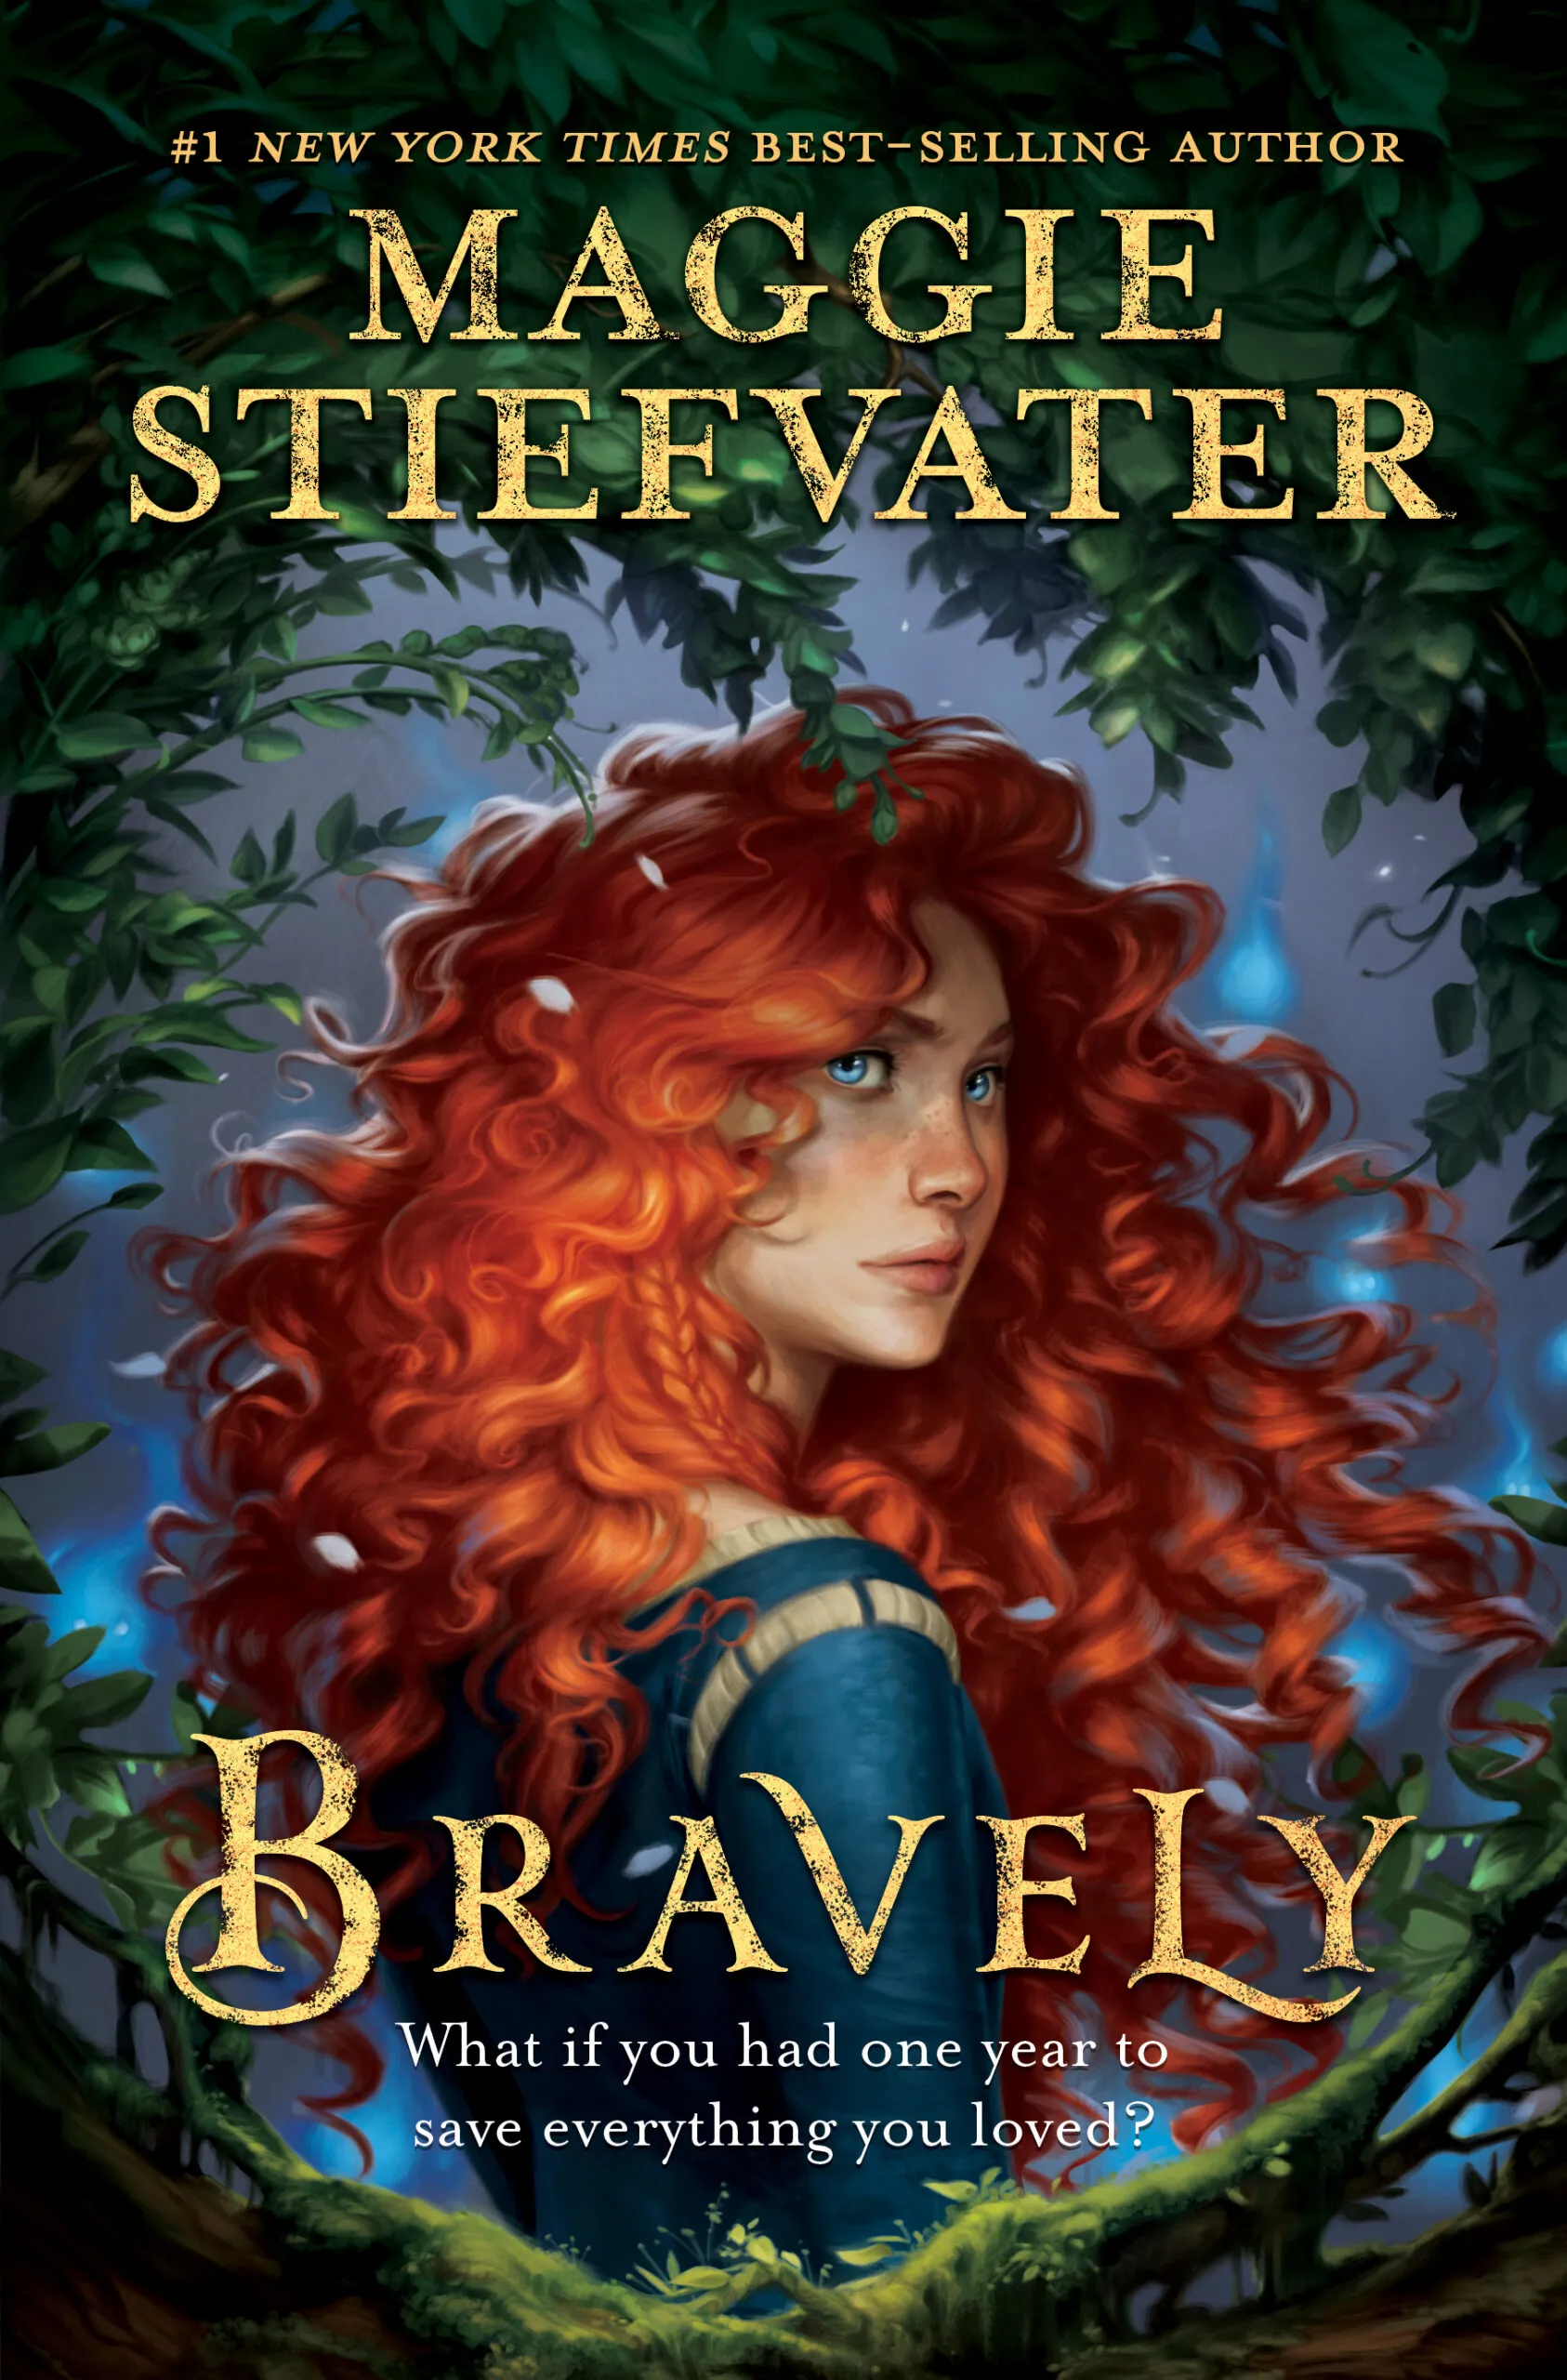 Bravely by Maggie Stiefvater Free Download